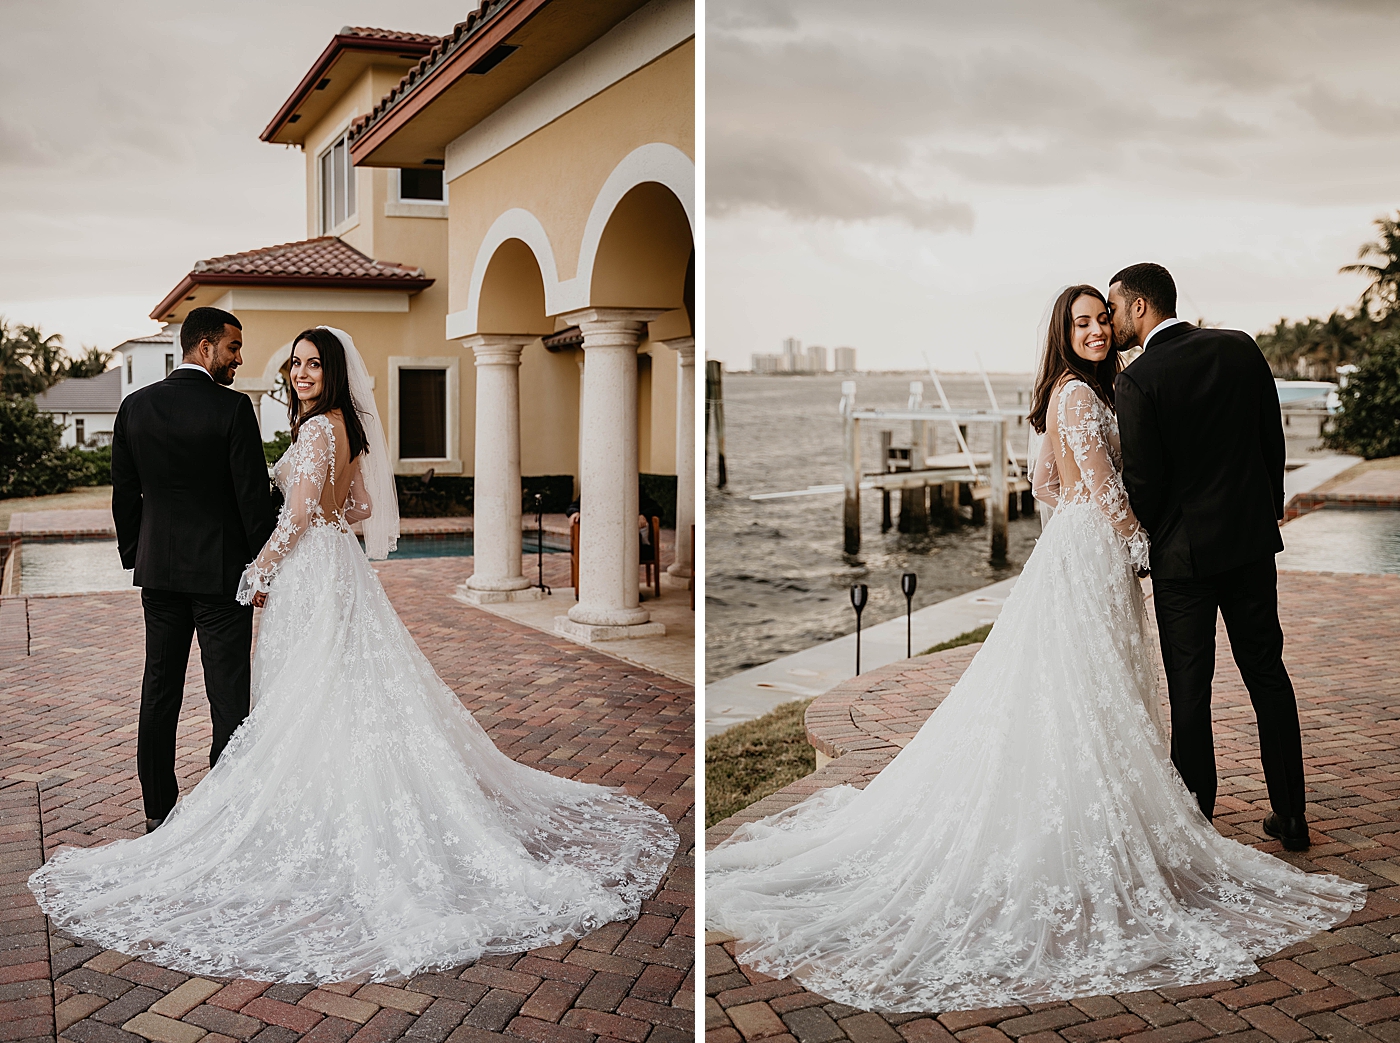 Bride and Groom portrait outside by the oceanside Intimate Home Wedding captured by South Florida Wedding Photographer Krystal Capone Photography